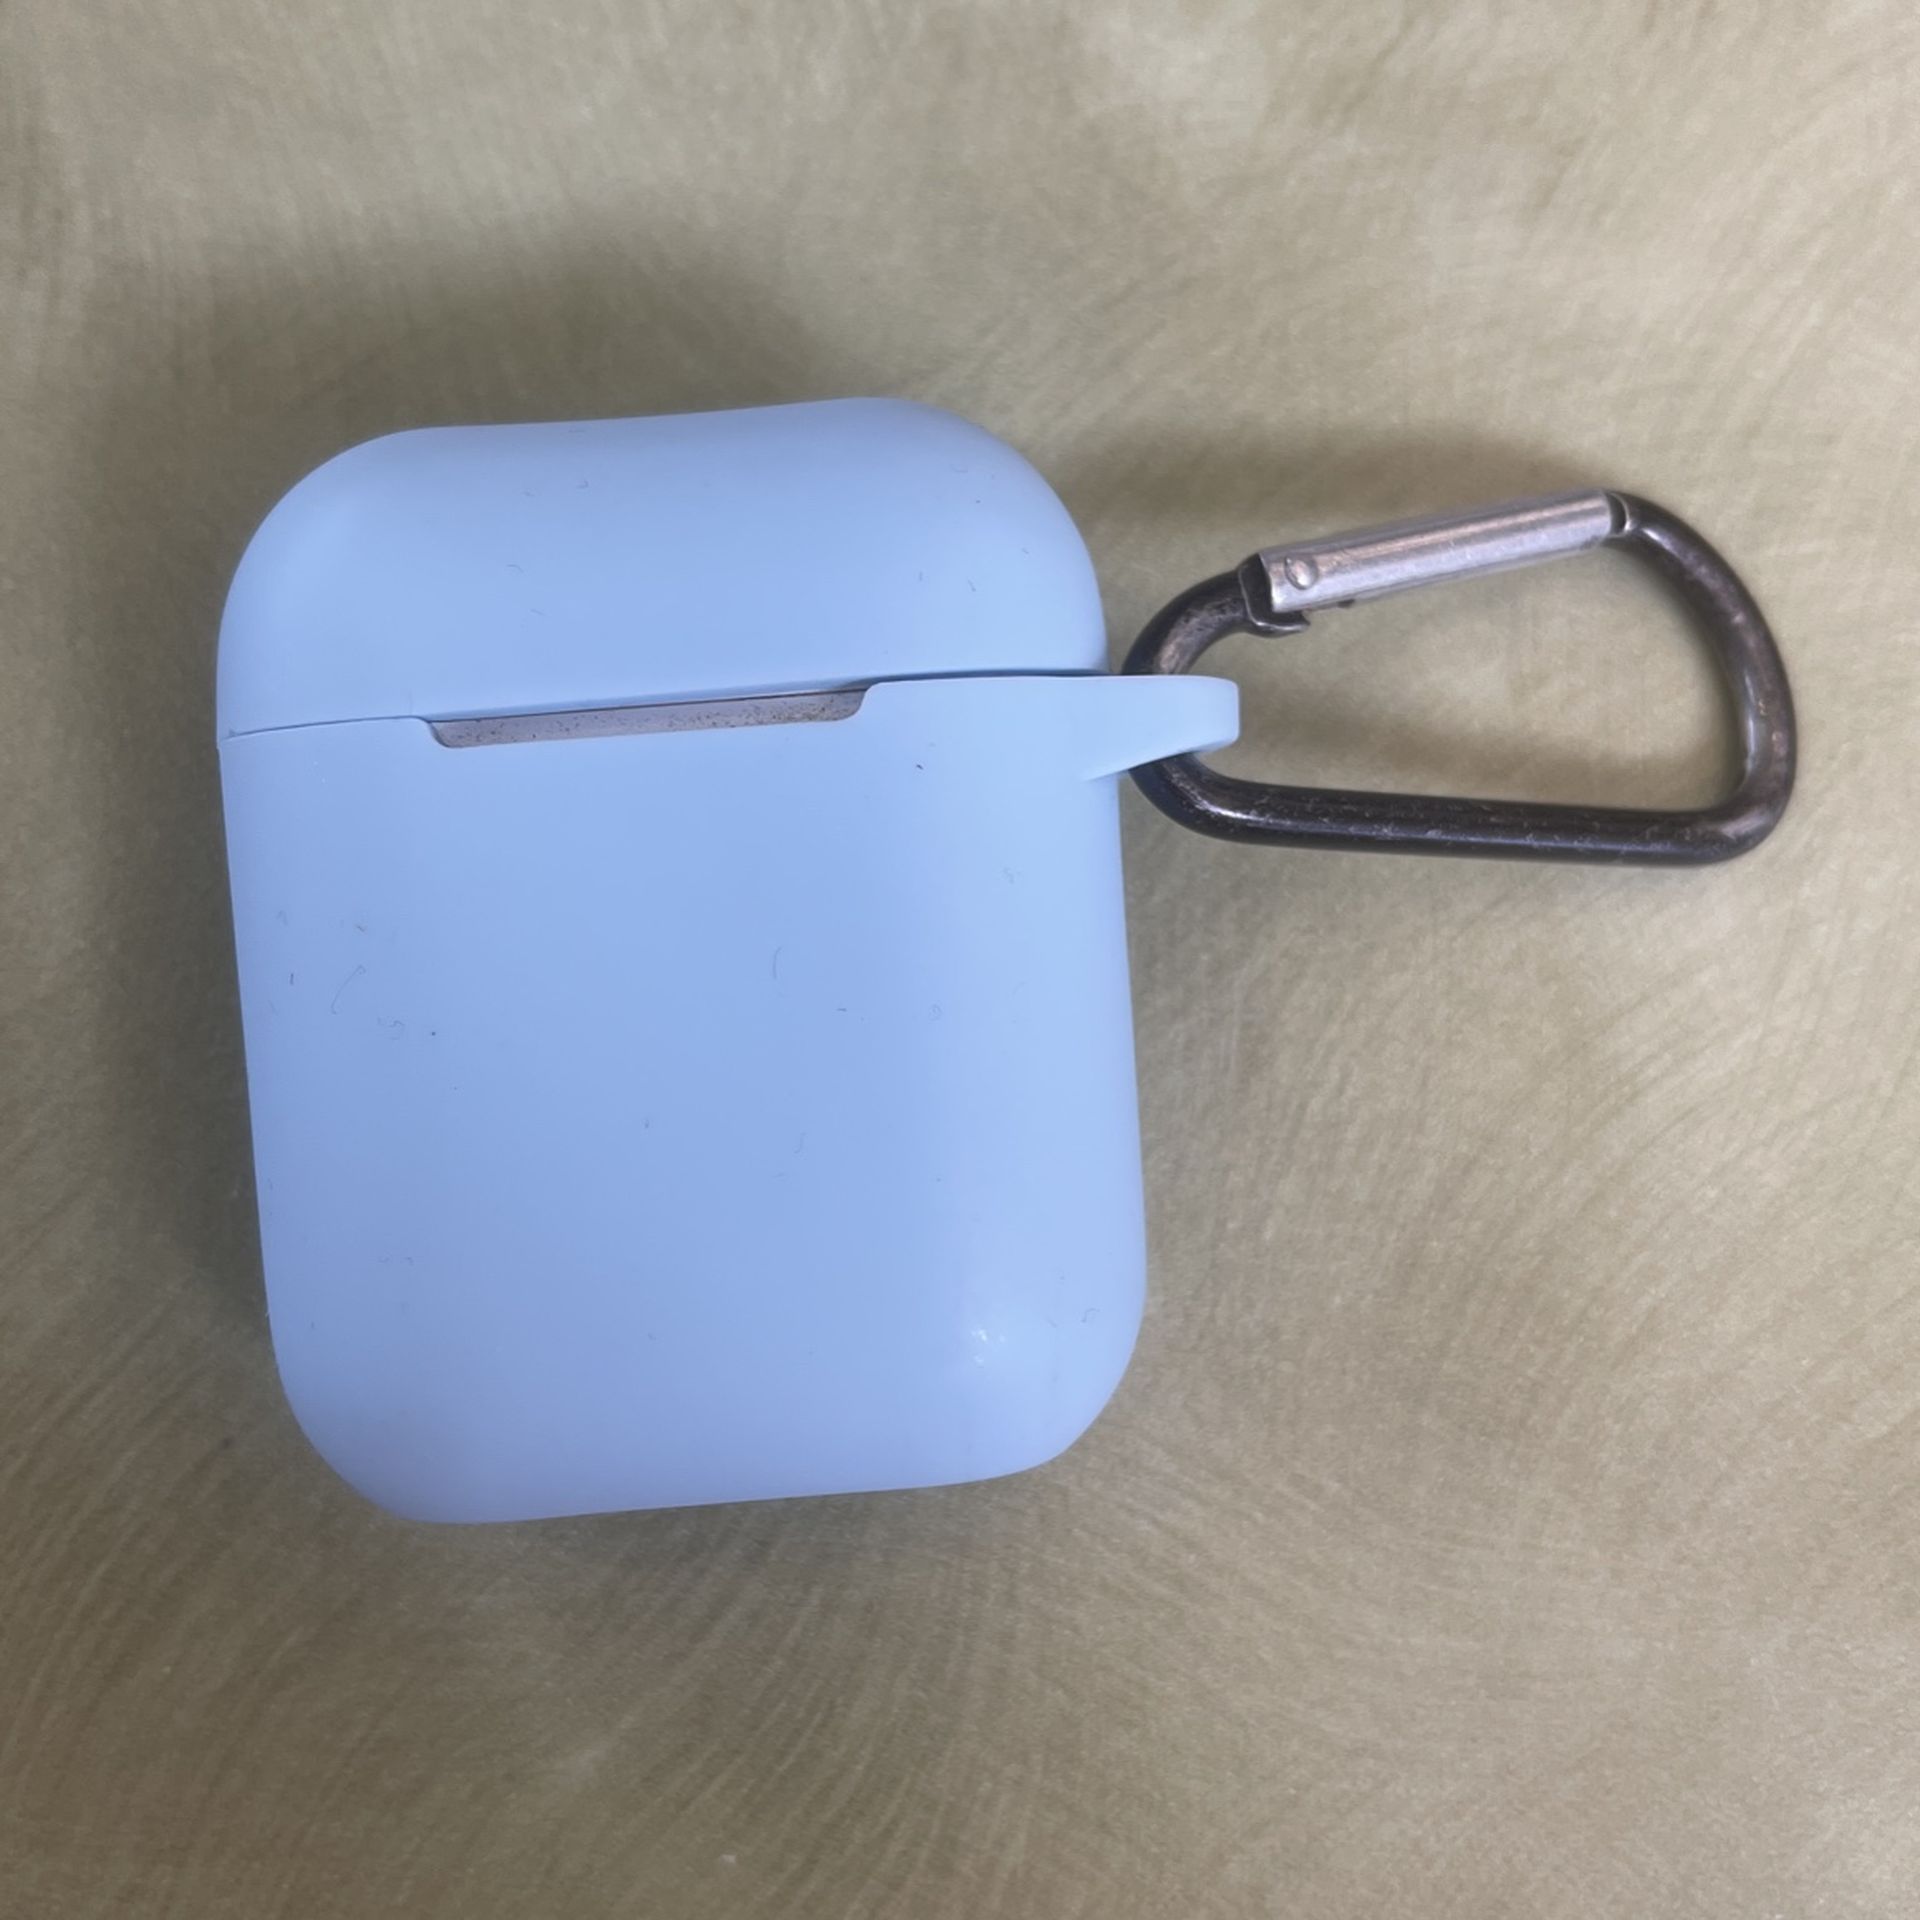 Apple AirPods 2nd Generation With Case